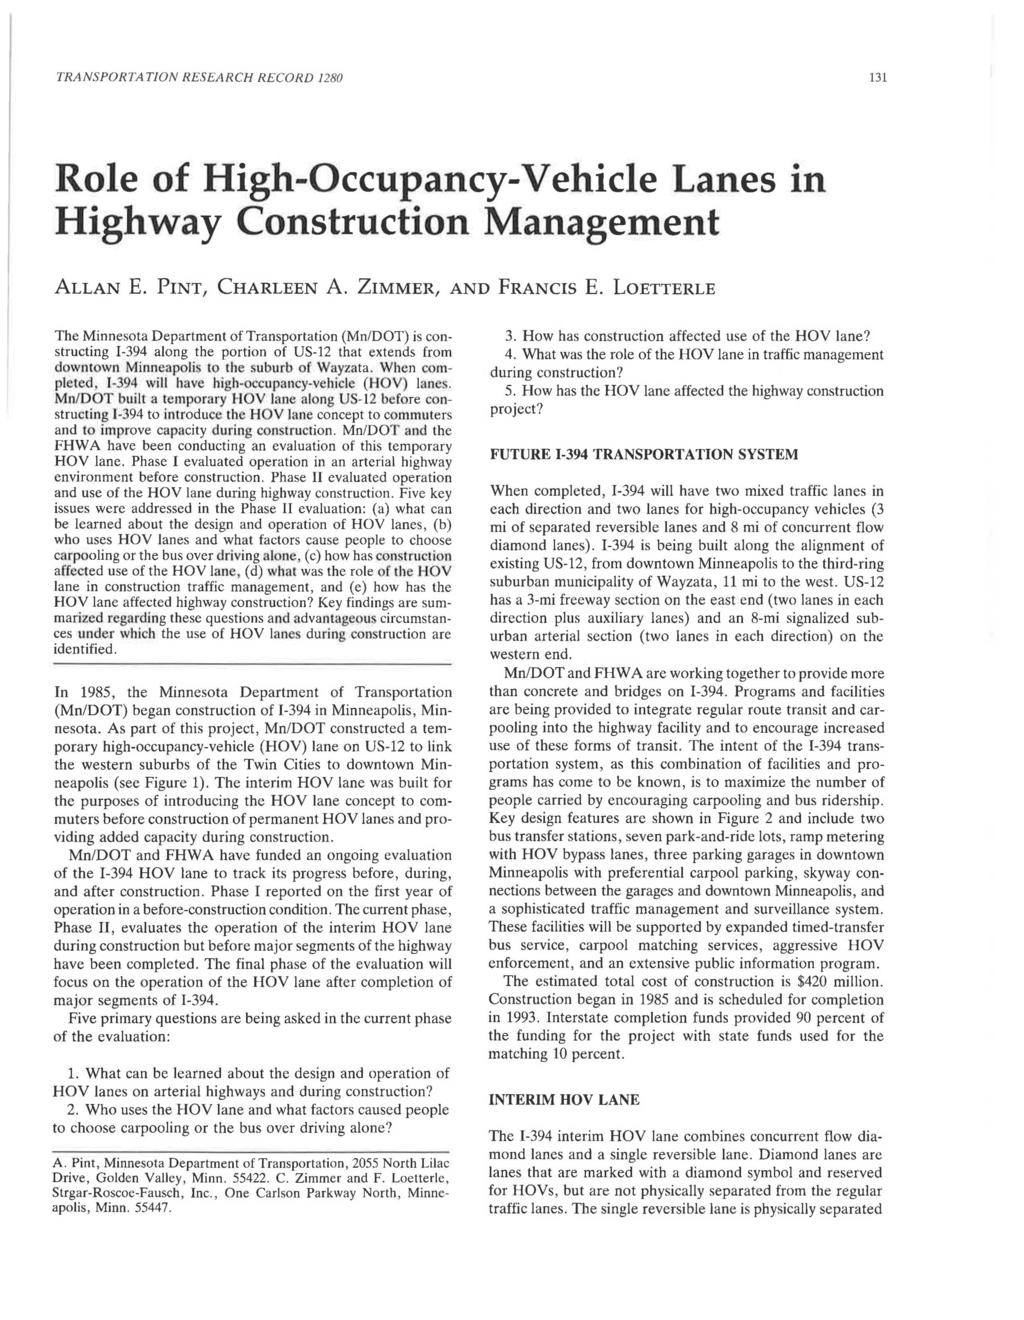 TRANSPORTATION RESEARCH RECORD 1280 131 Role of High-Occupancy-Vehicle Lanes Highway Construction Management In ALLAN E. PINT, CHARLEEN A. ZIMMER, AND FRANCIS E.